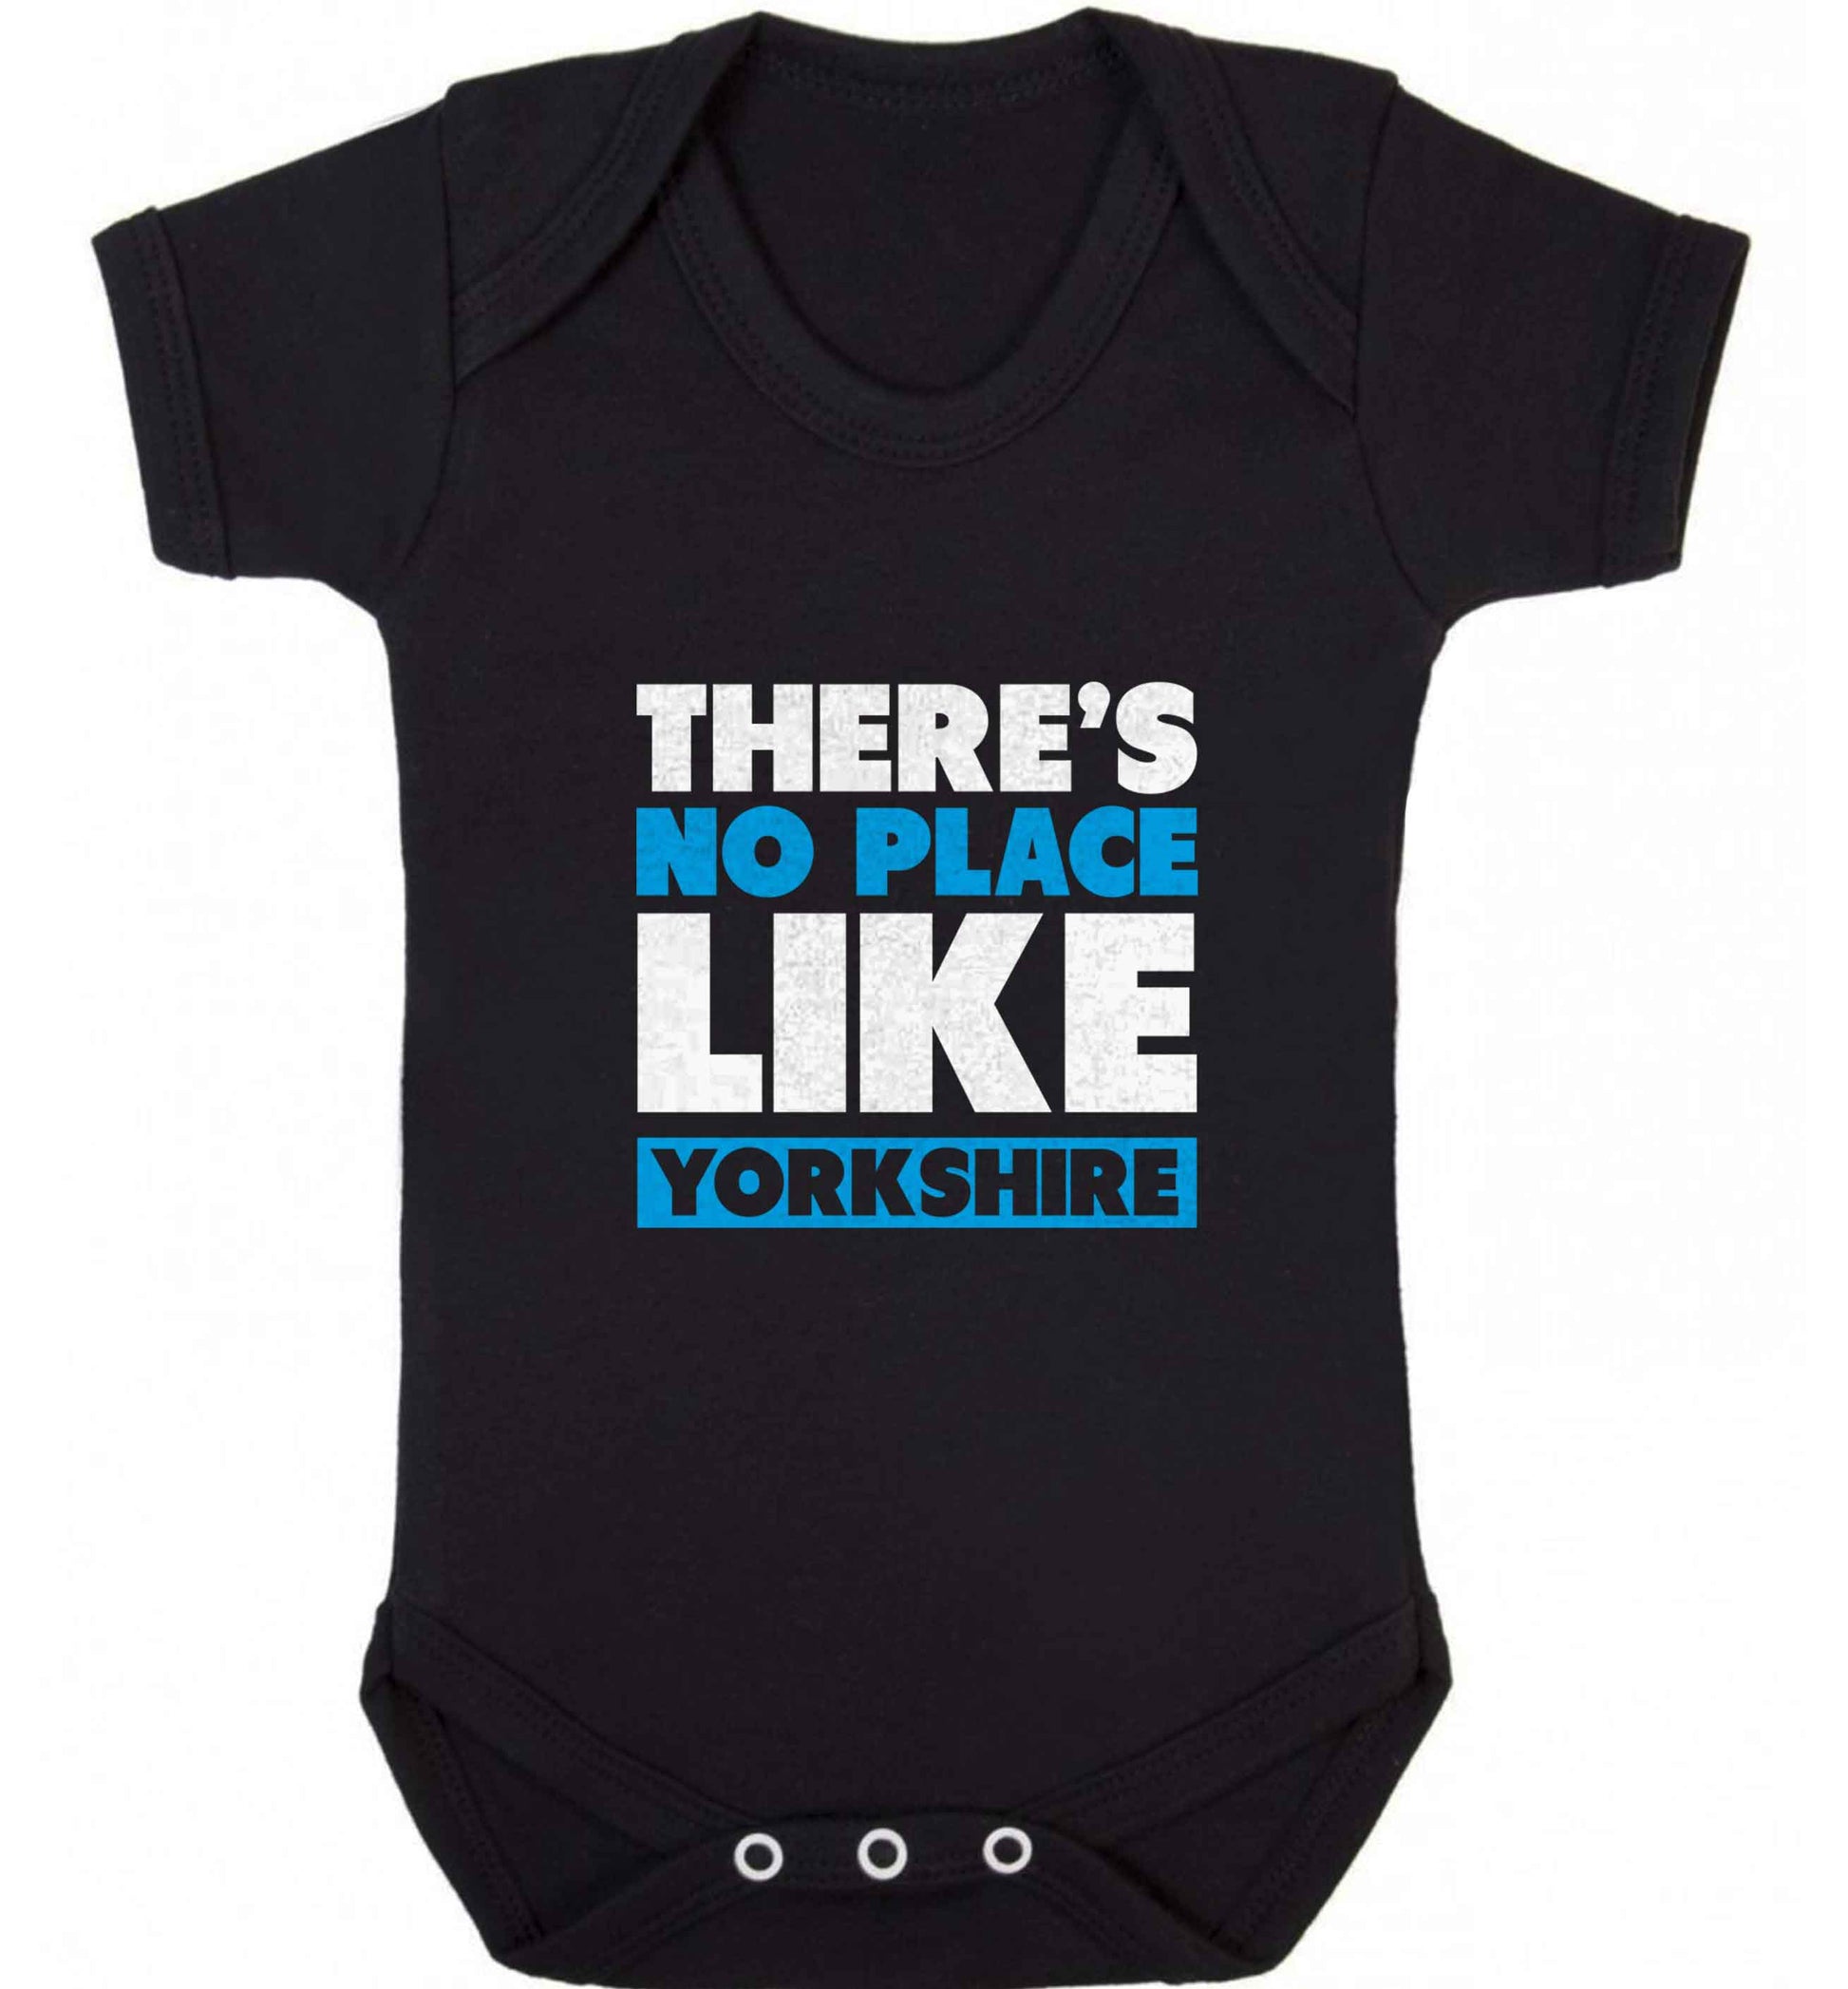 There's no place like Yorkshire baby vest black 18-24 months